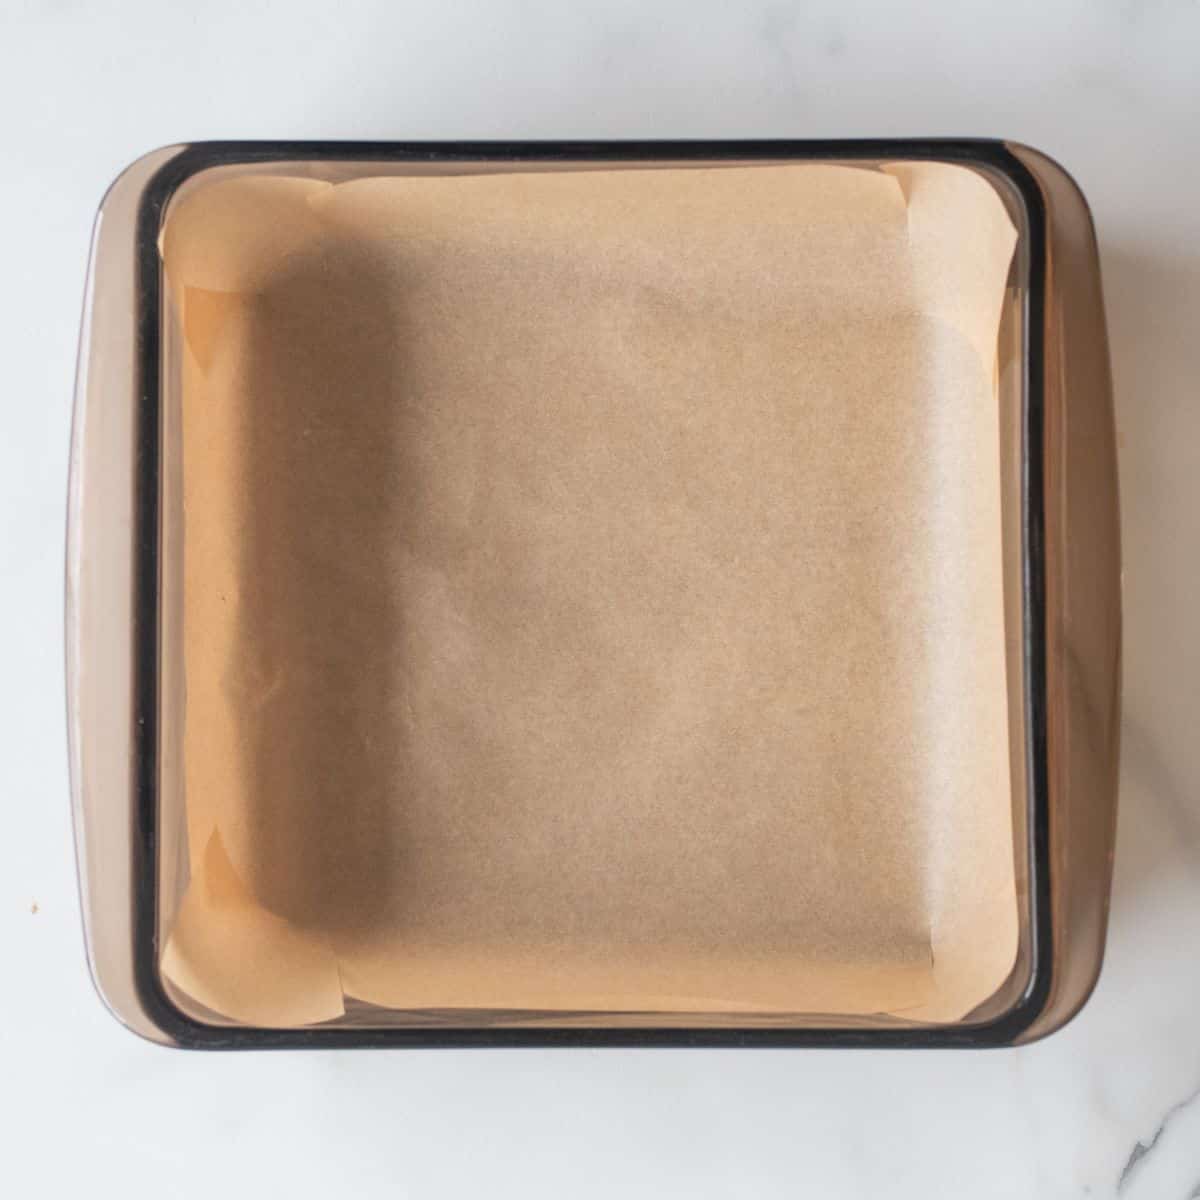 An overhead view of an 8-inch baking dish lined with parchment paper.